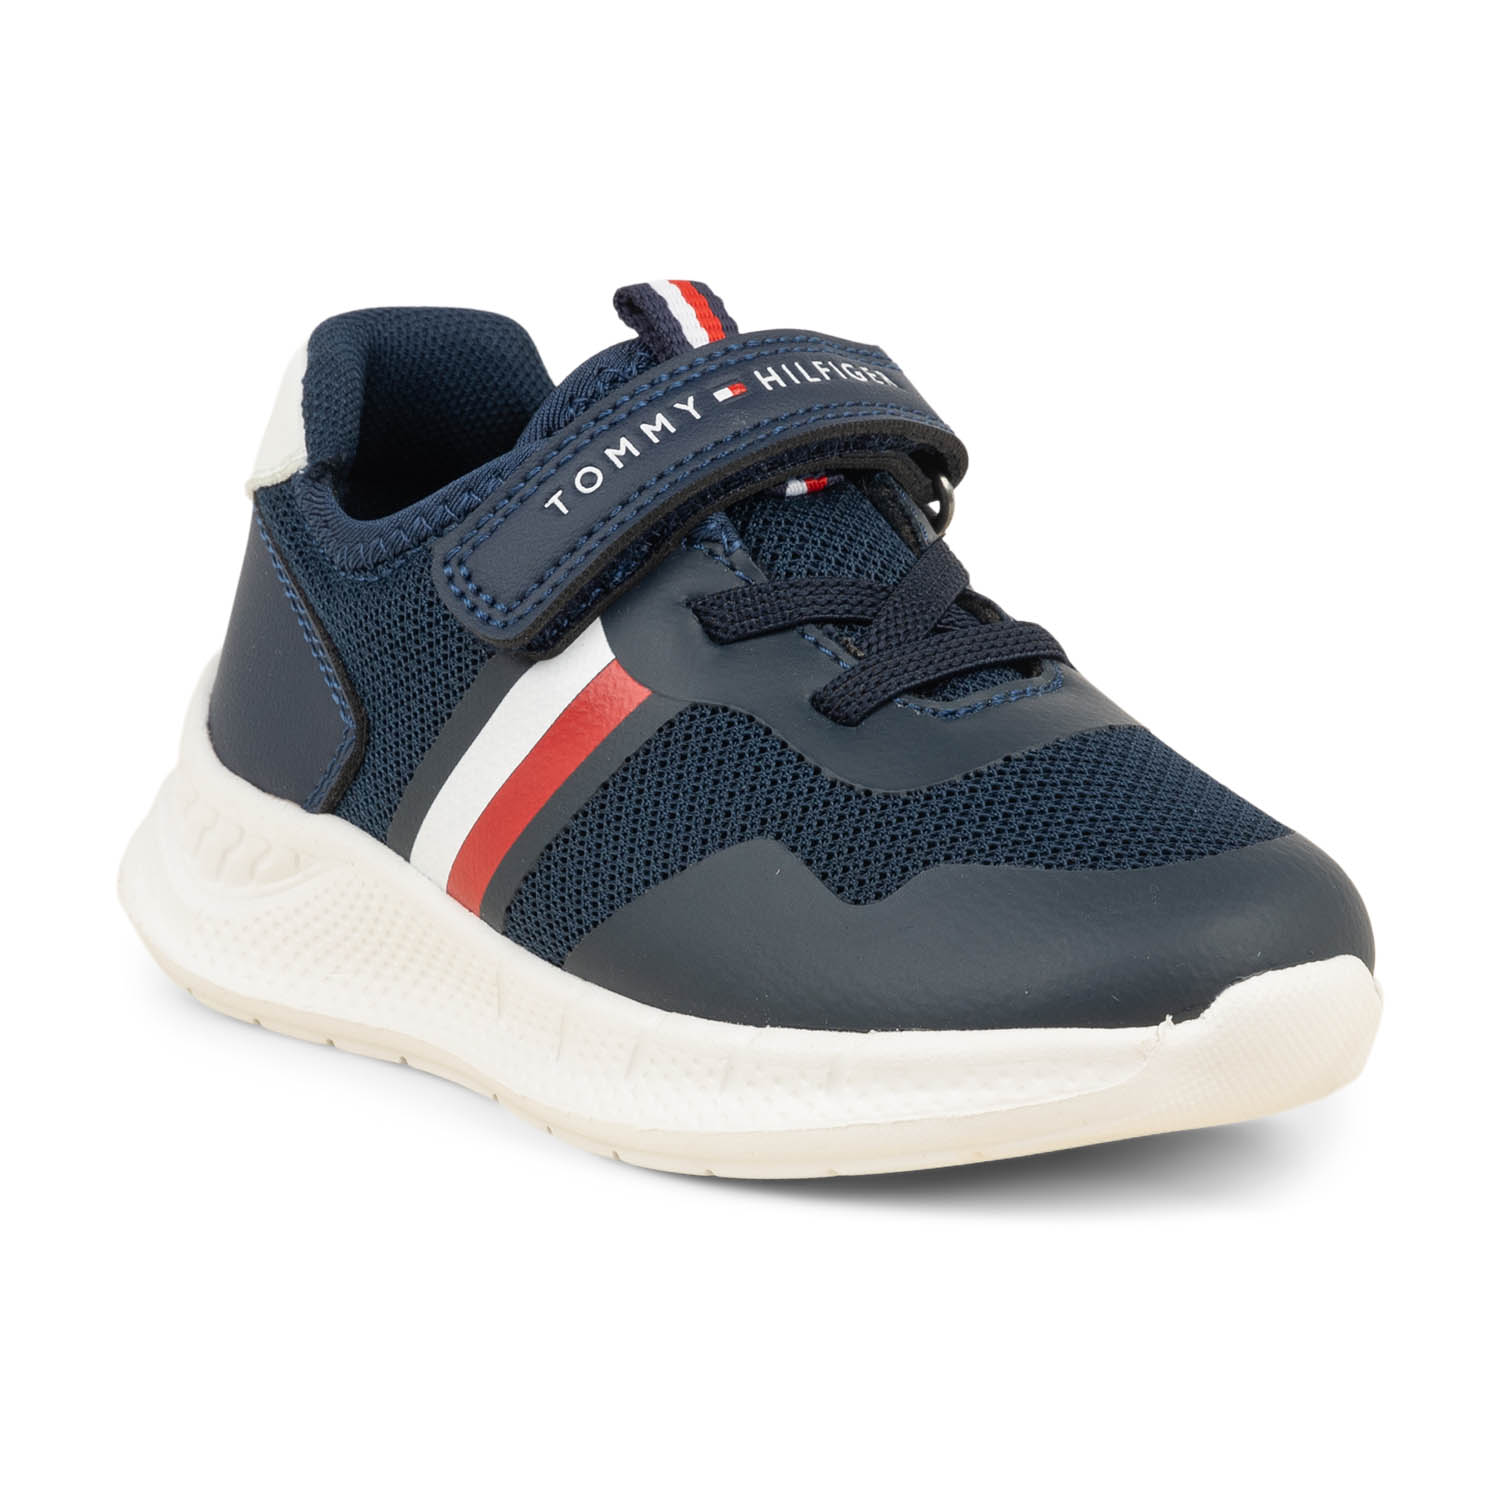 02 - CONNOR - TOMMY HILFIGER -  - Synthétique